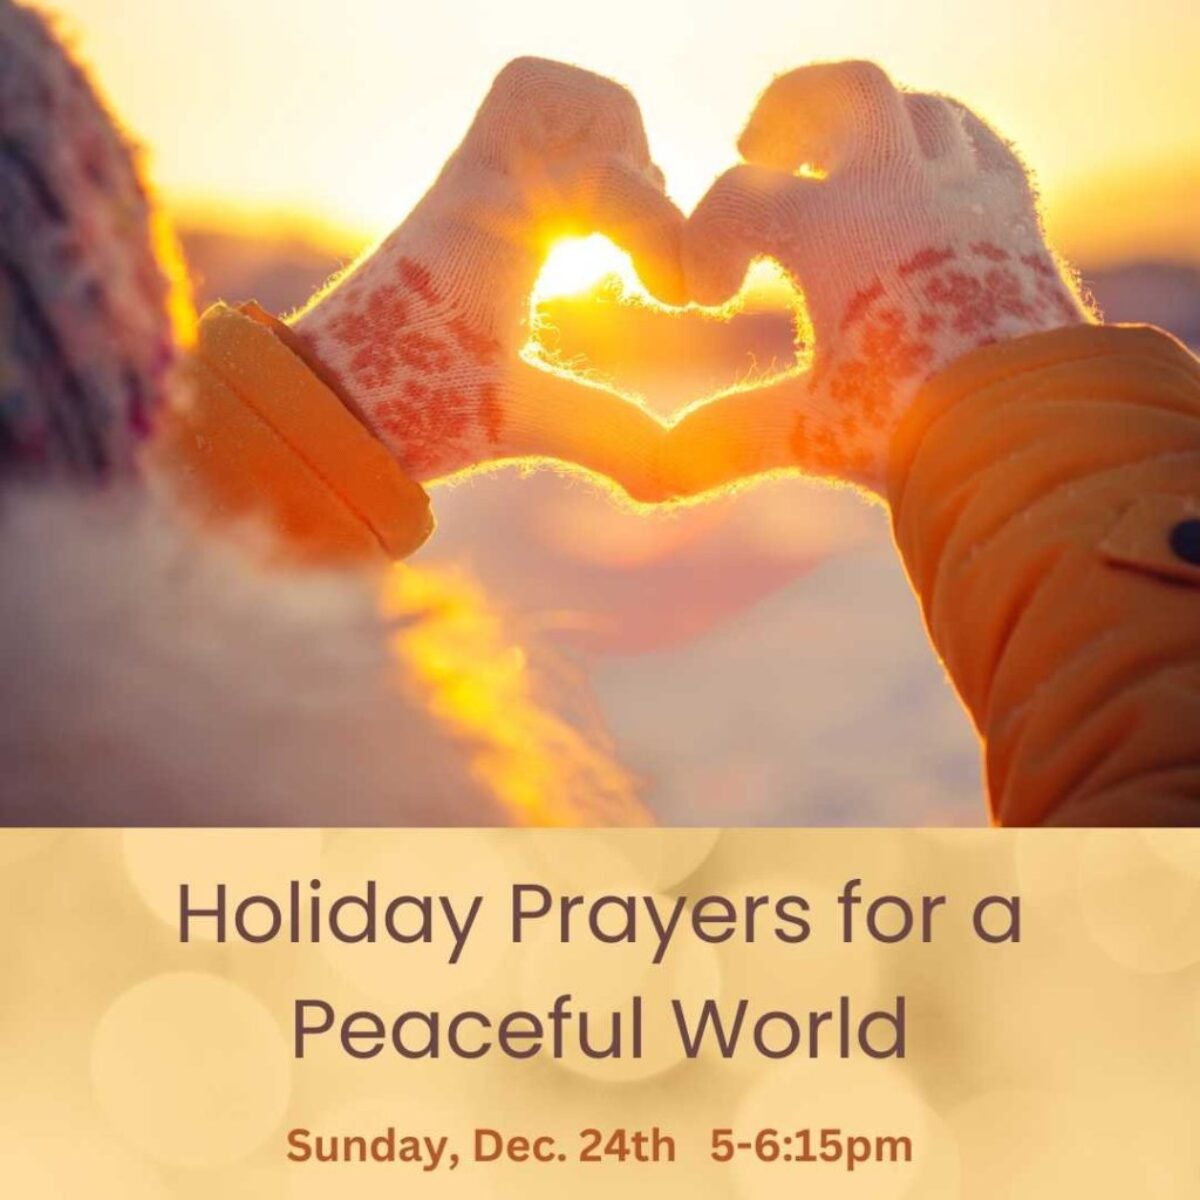 Holiday Prayers for a Peaceful World | Visit Baltimore